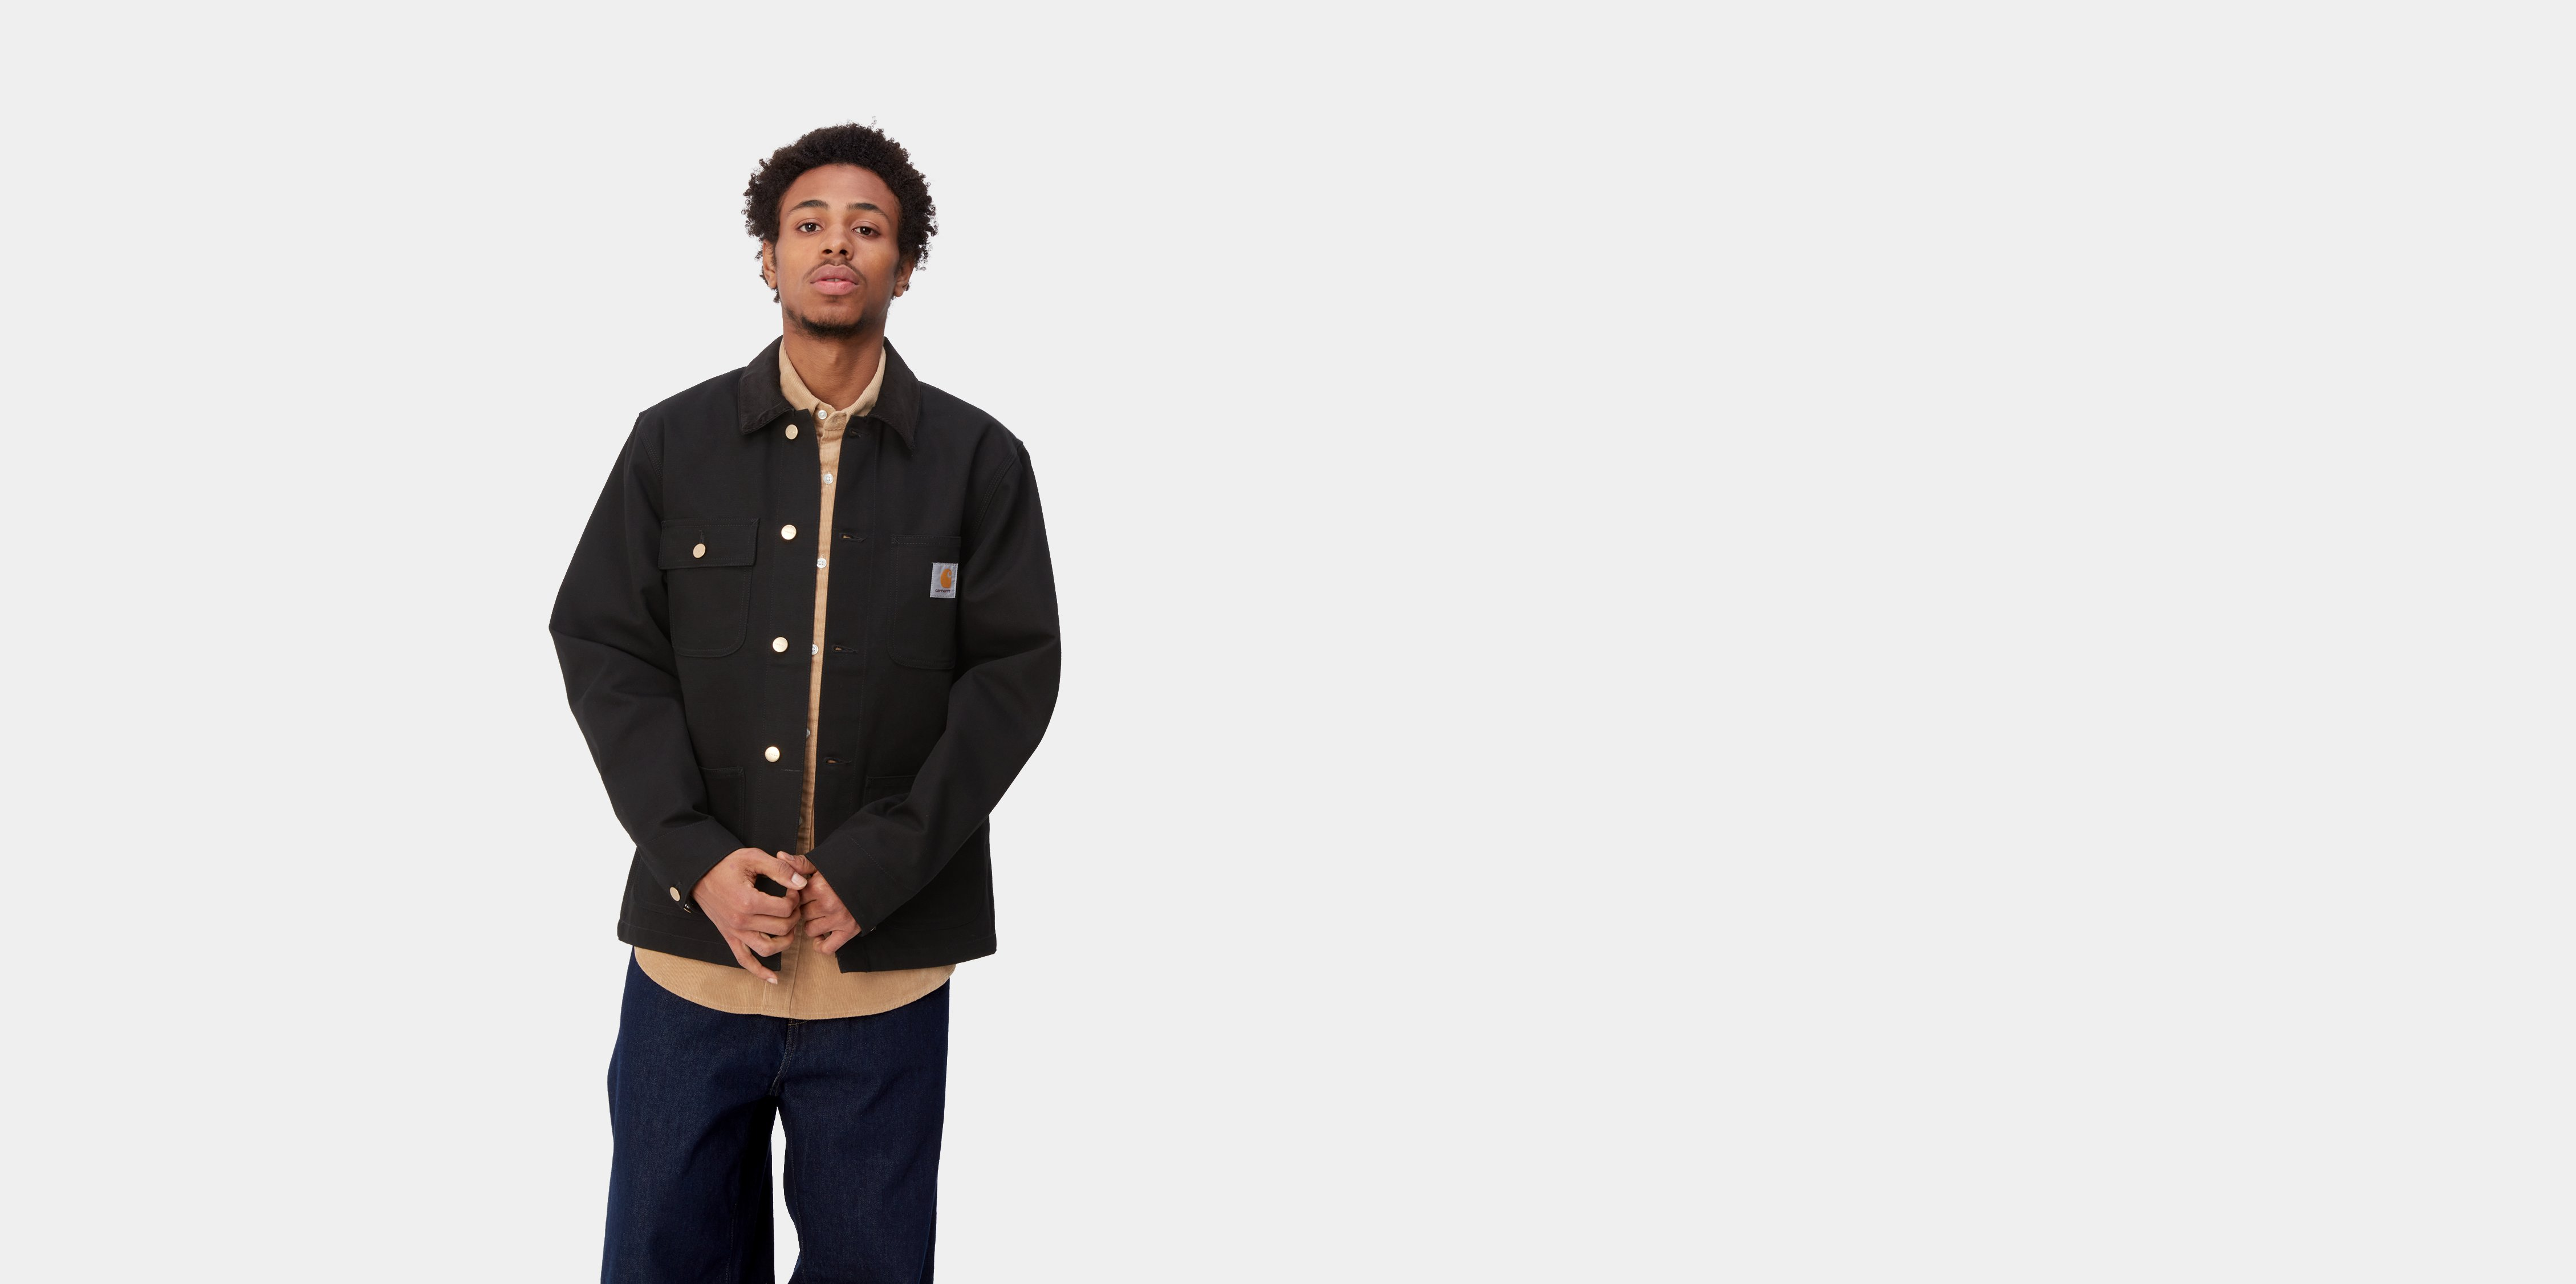  Carhartt - Men's Outerwear Jackets & Coats / Men's Clothing:  Clothing, Shoes & Jewelry